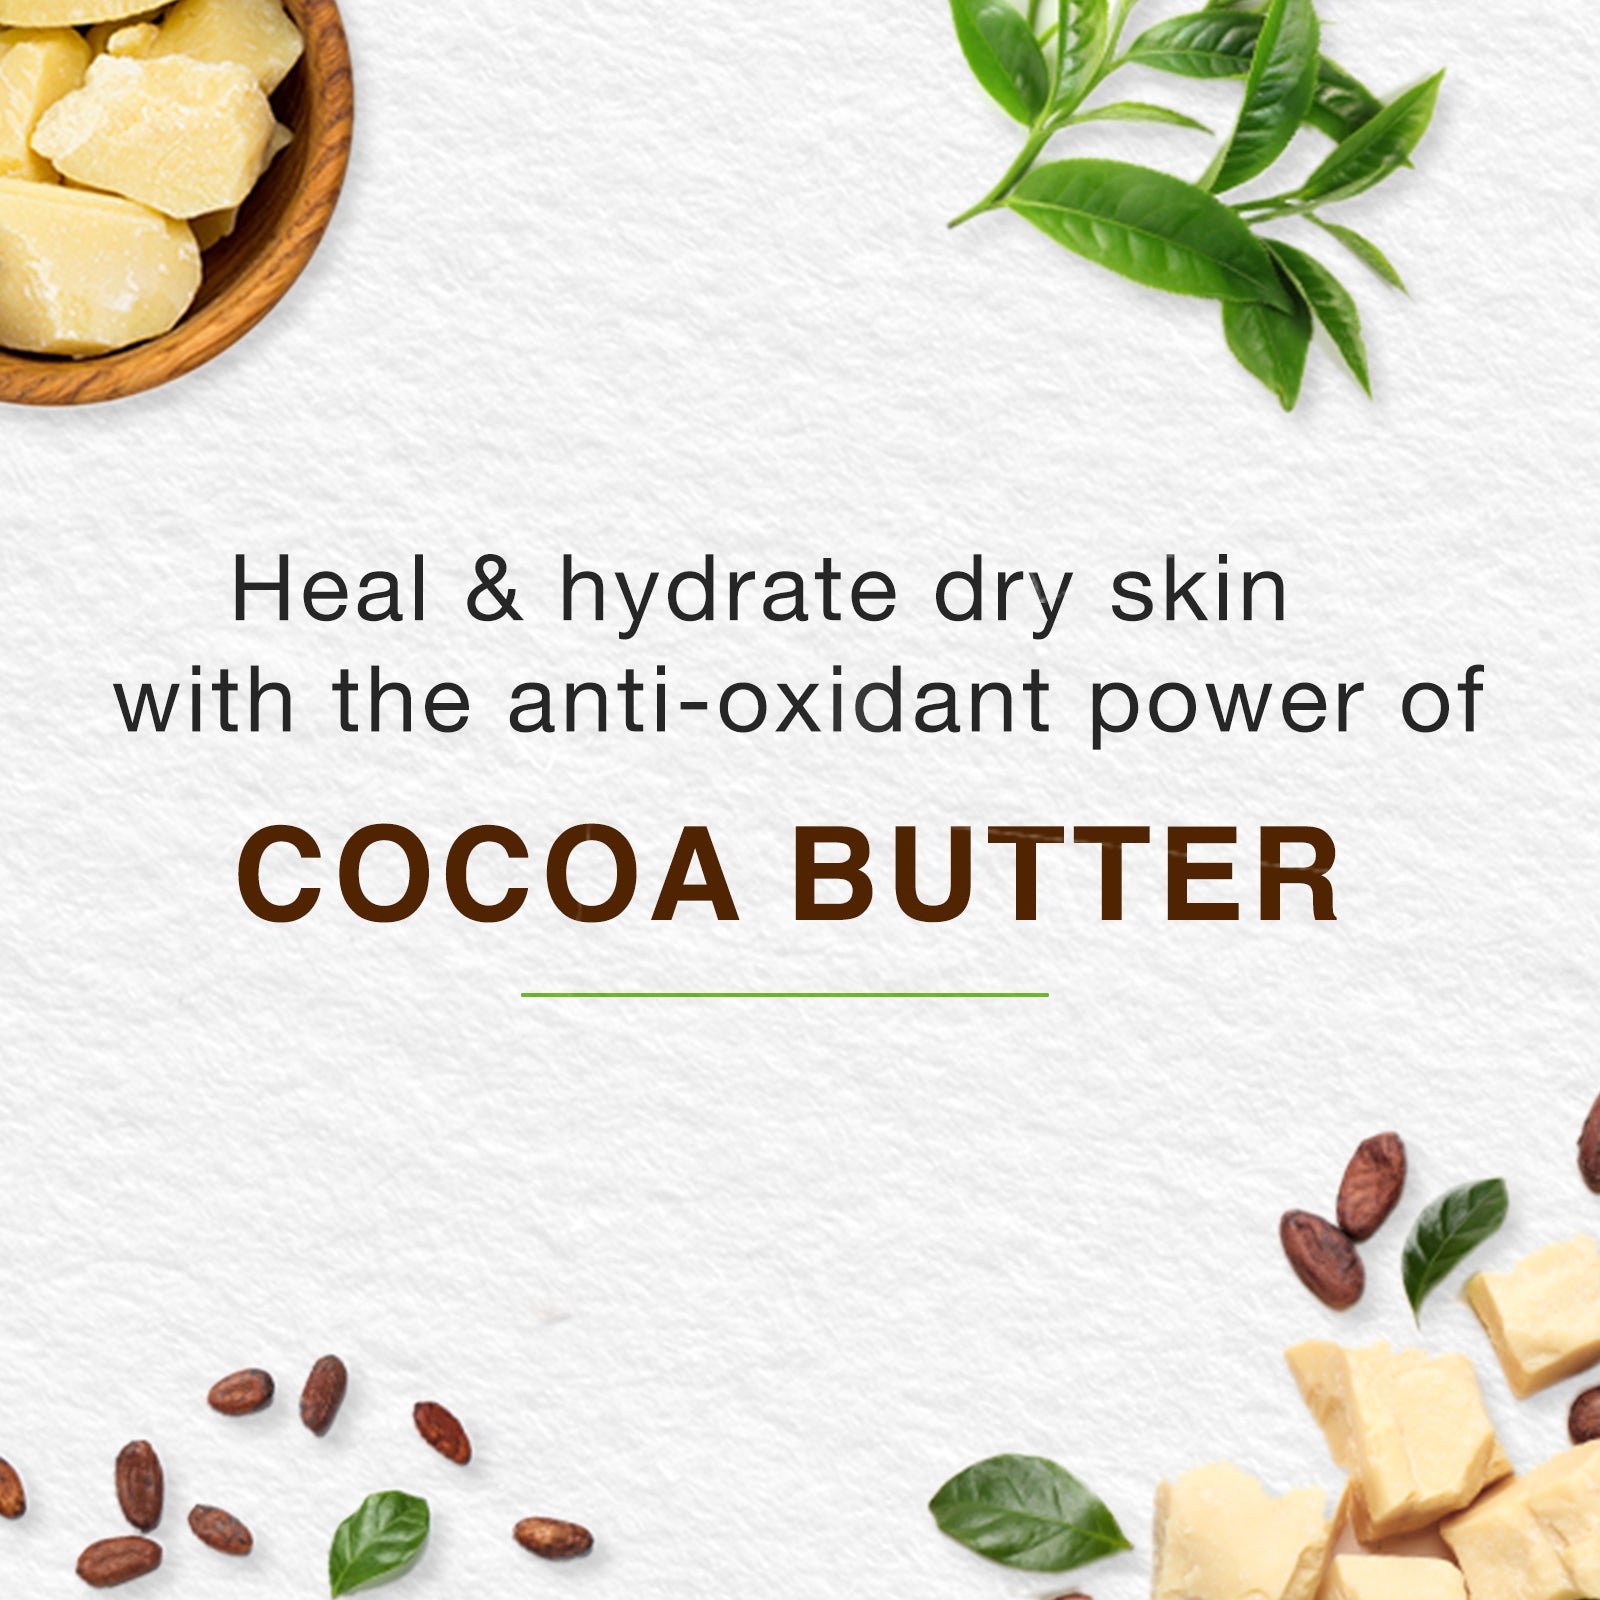 Cocoa Butter Intensive Body Lotion 200ml